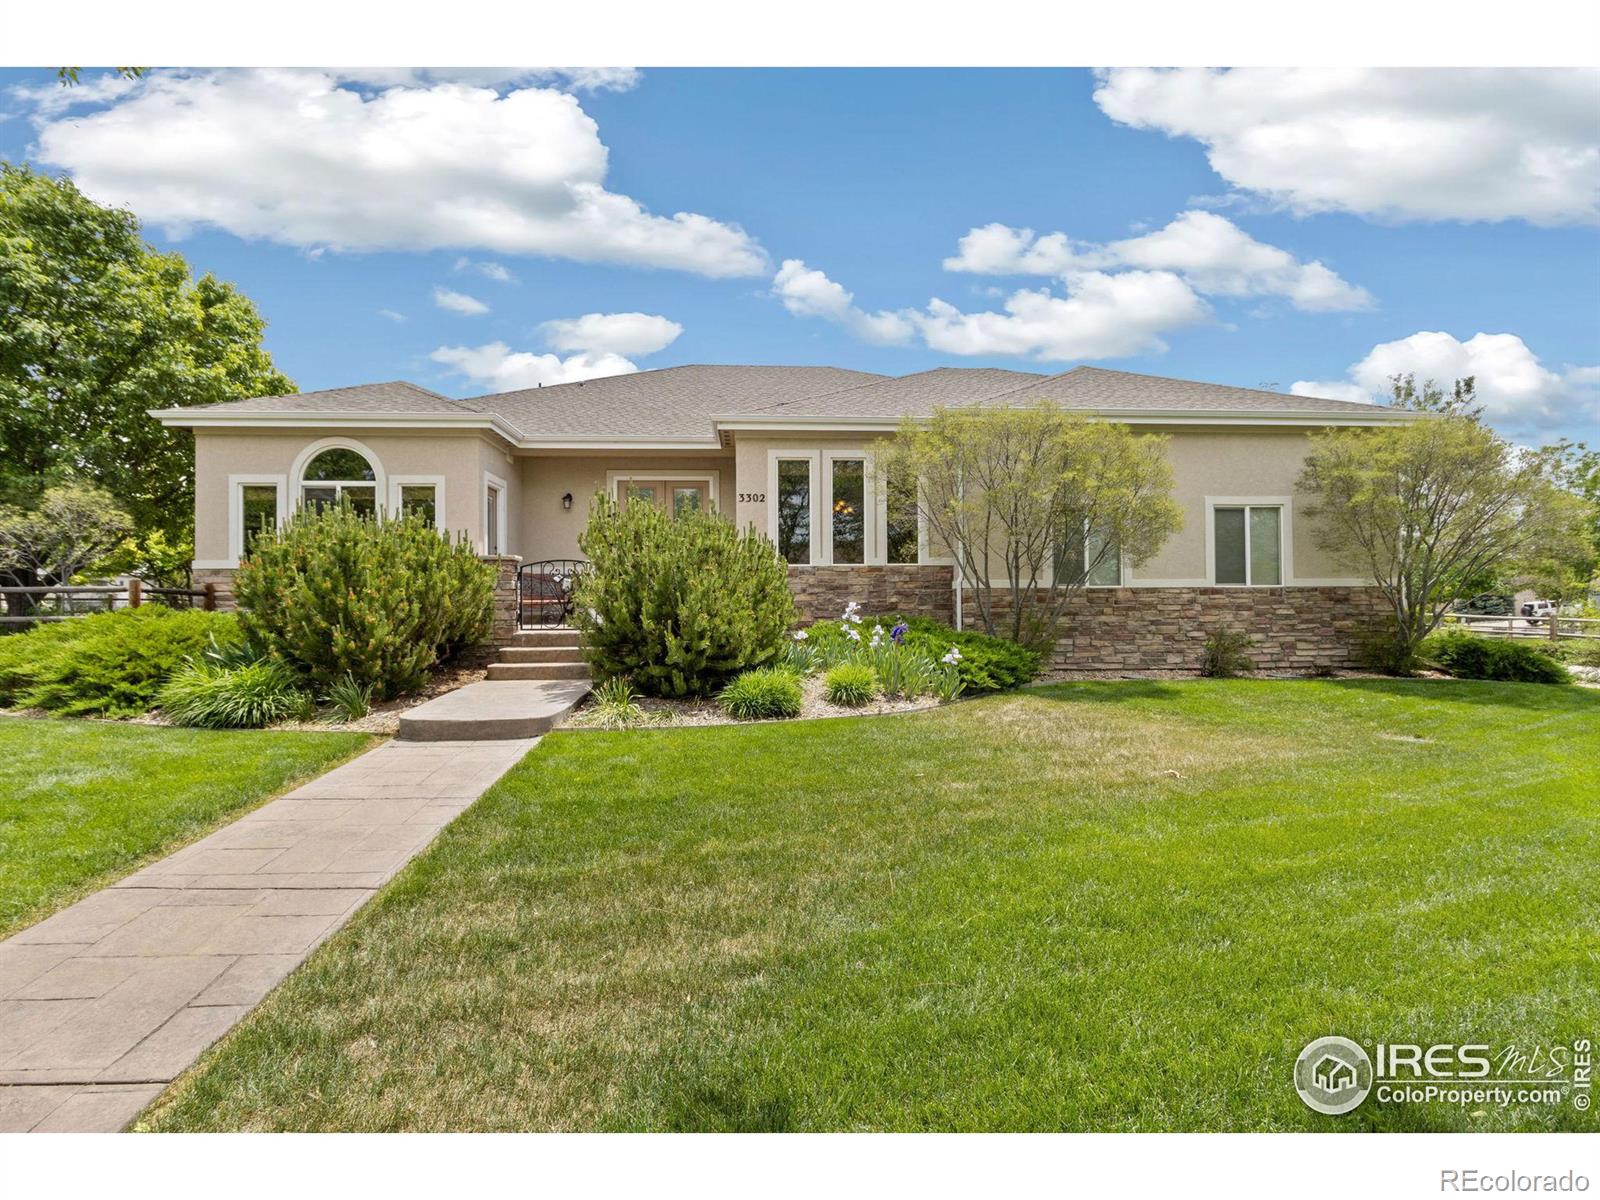 3302  Buntwing Lane, fort collins MLS: 4567891010964 Beds: 5 Baths: 5 Price: $1,150,000